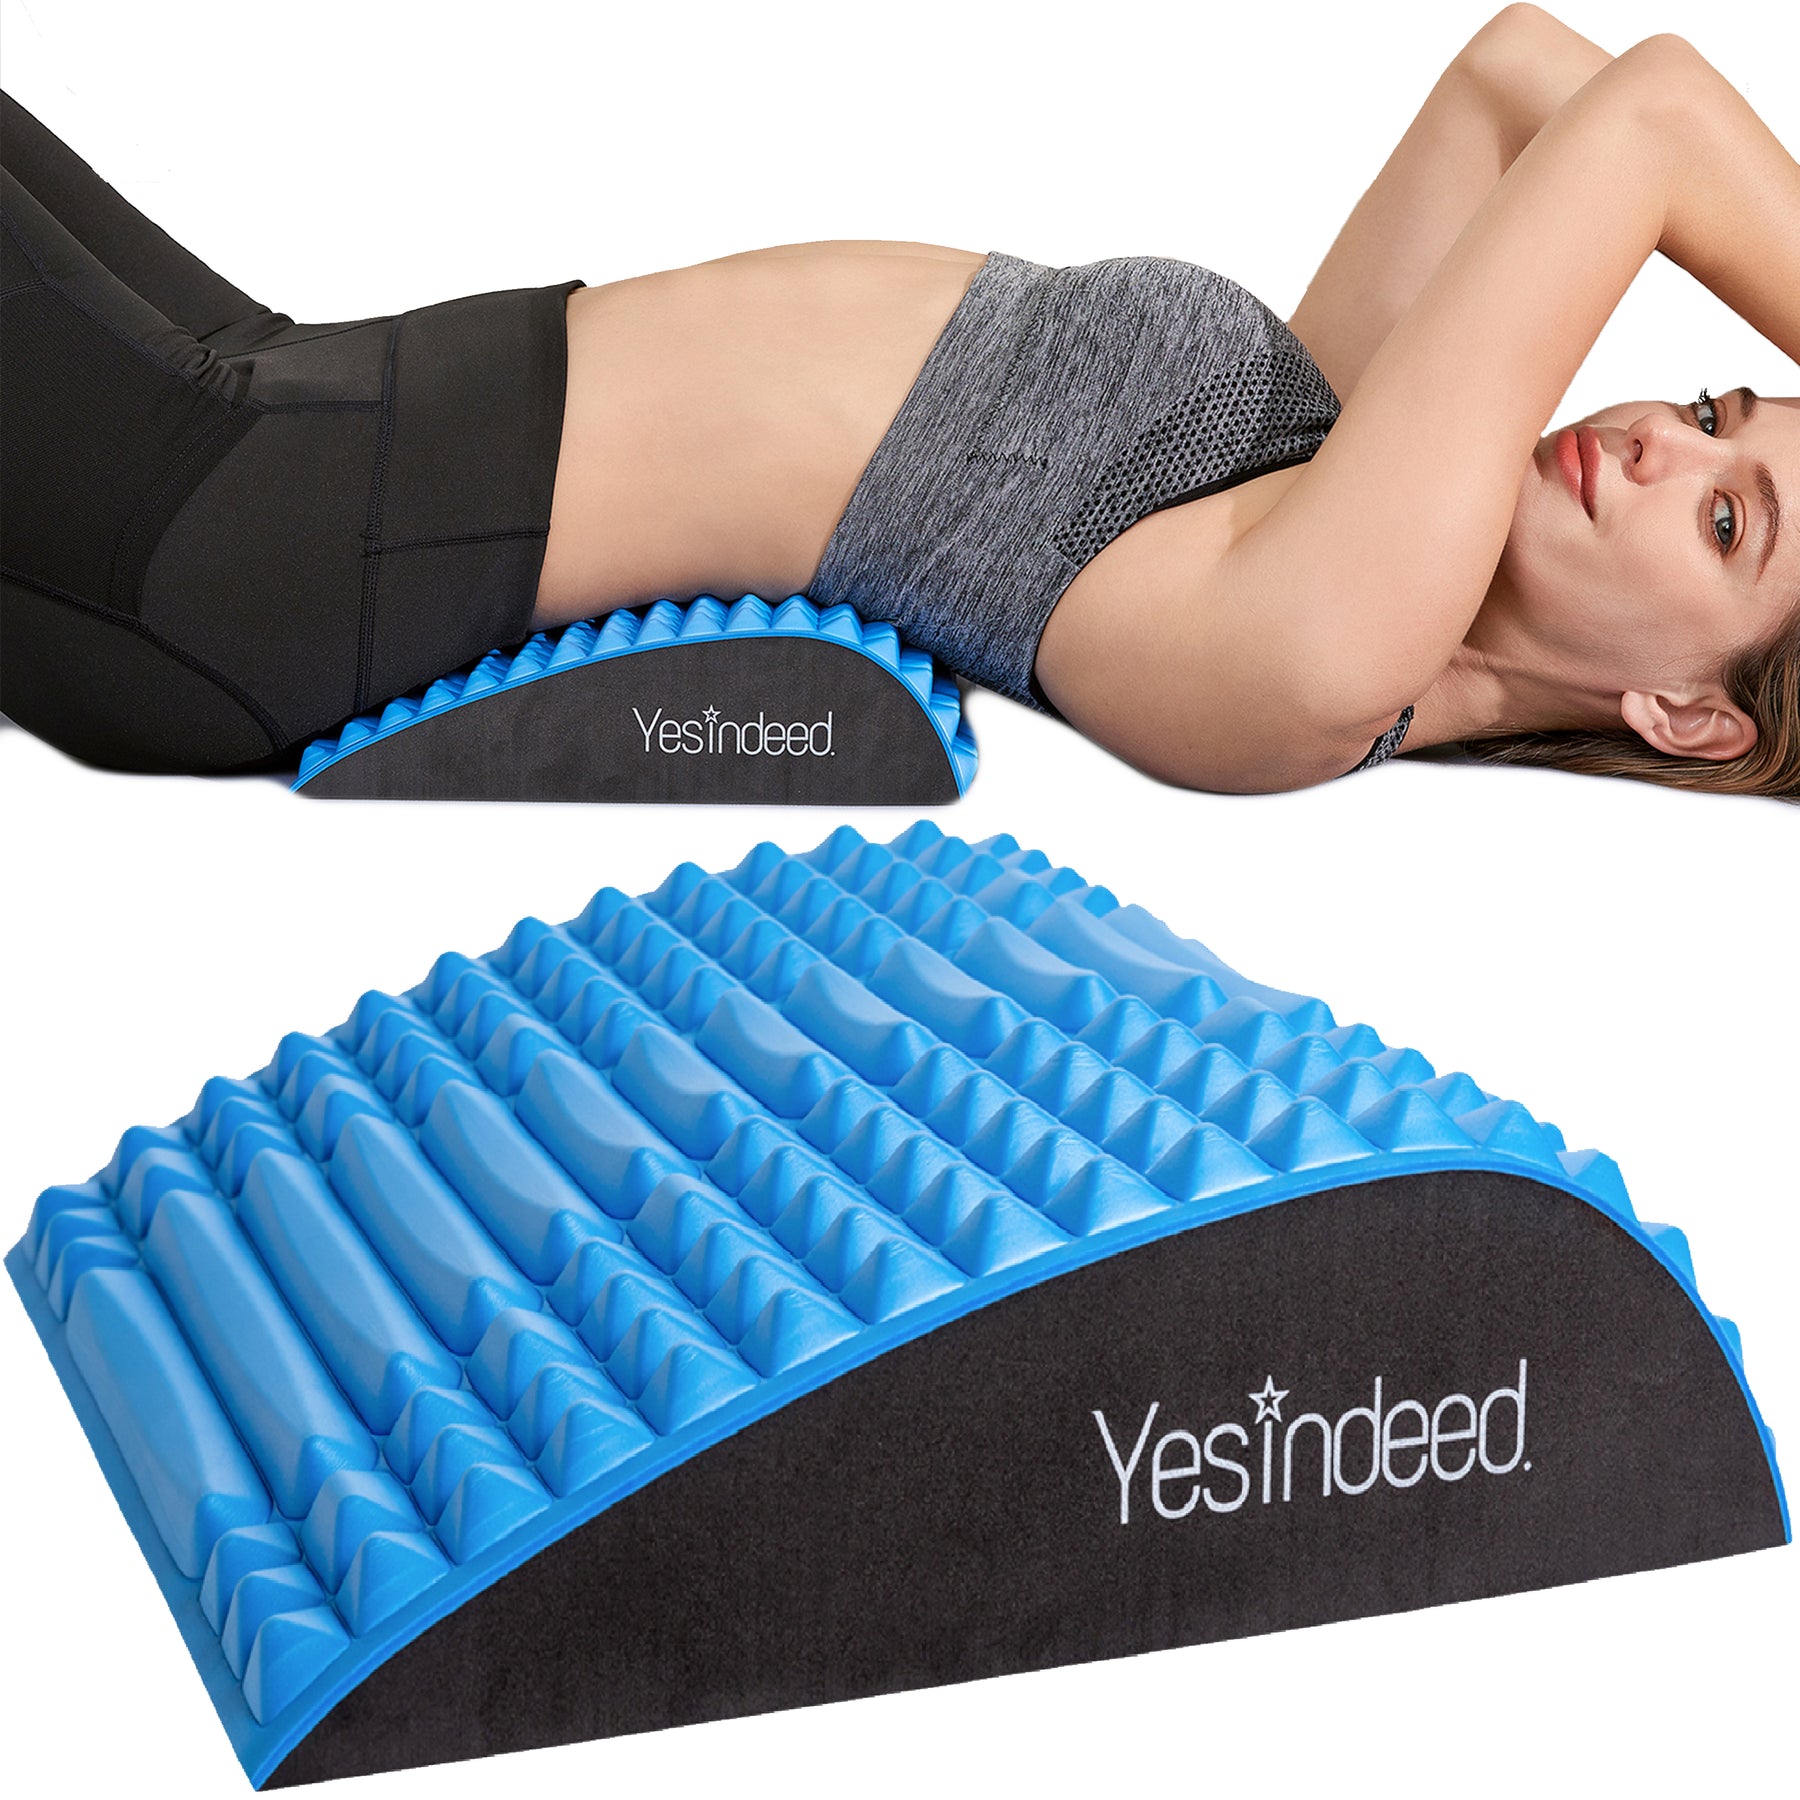 Lower Back Pain Relief Treatment Stretcher, Chronic Lumbar Support